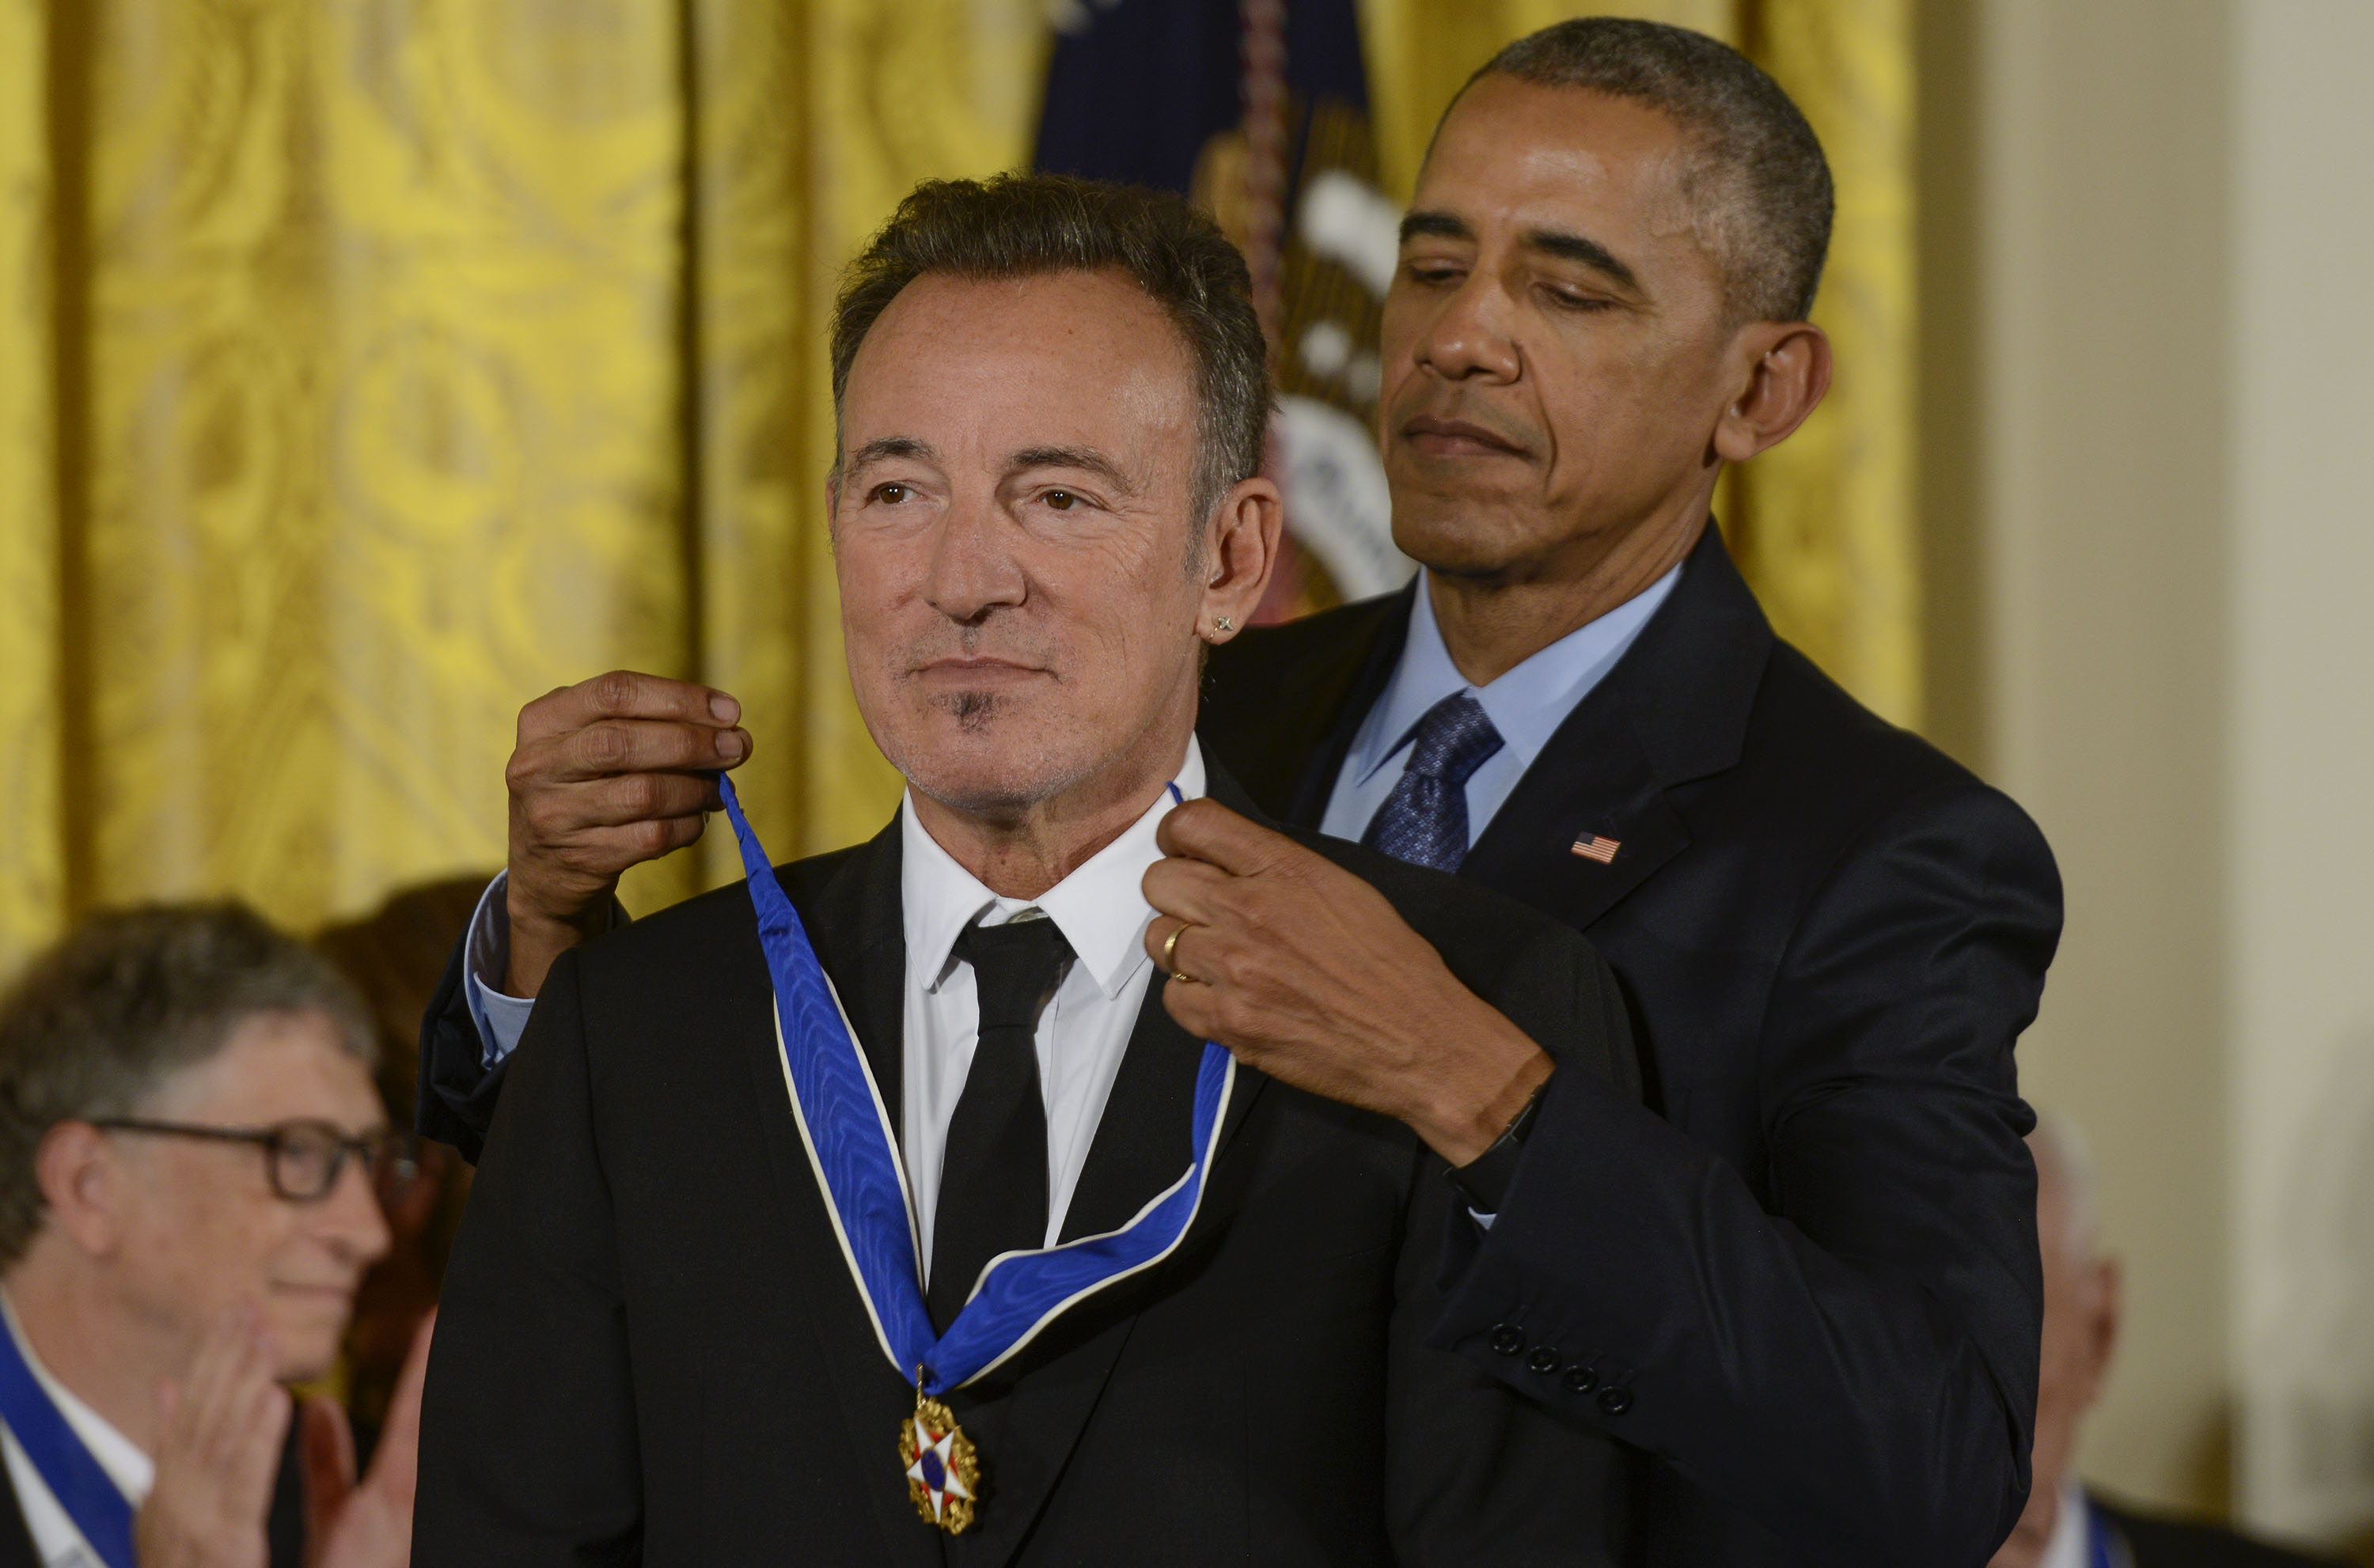 President Obama presents Bruce Springsteen with the 2016 Presidential Medal Of Freedom